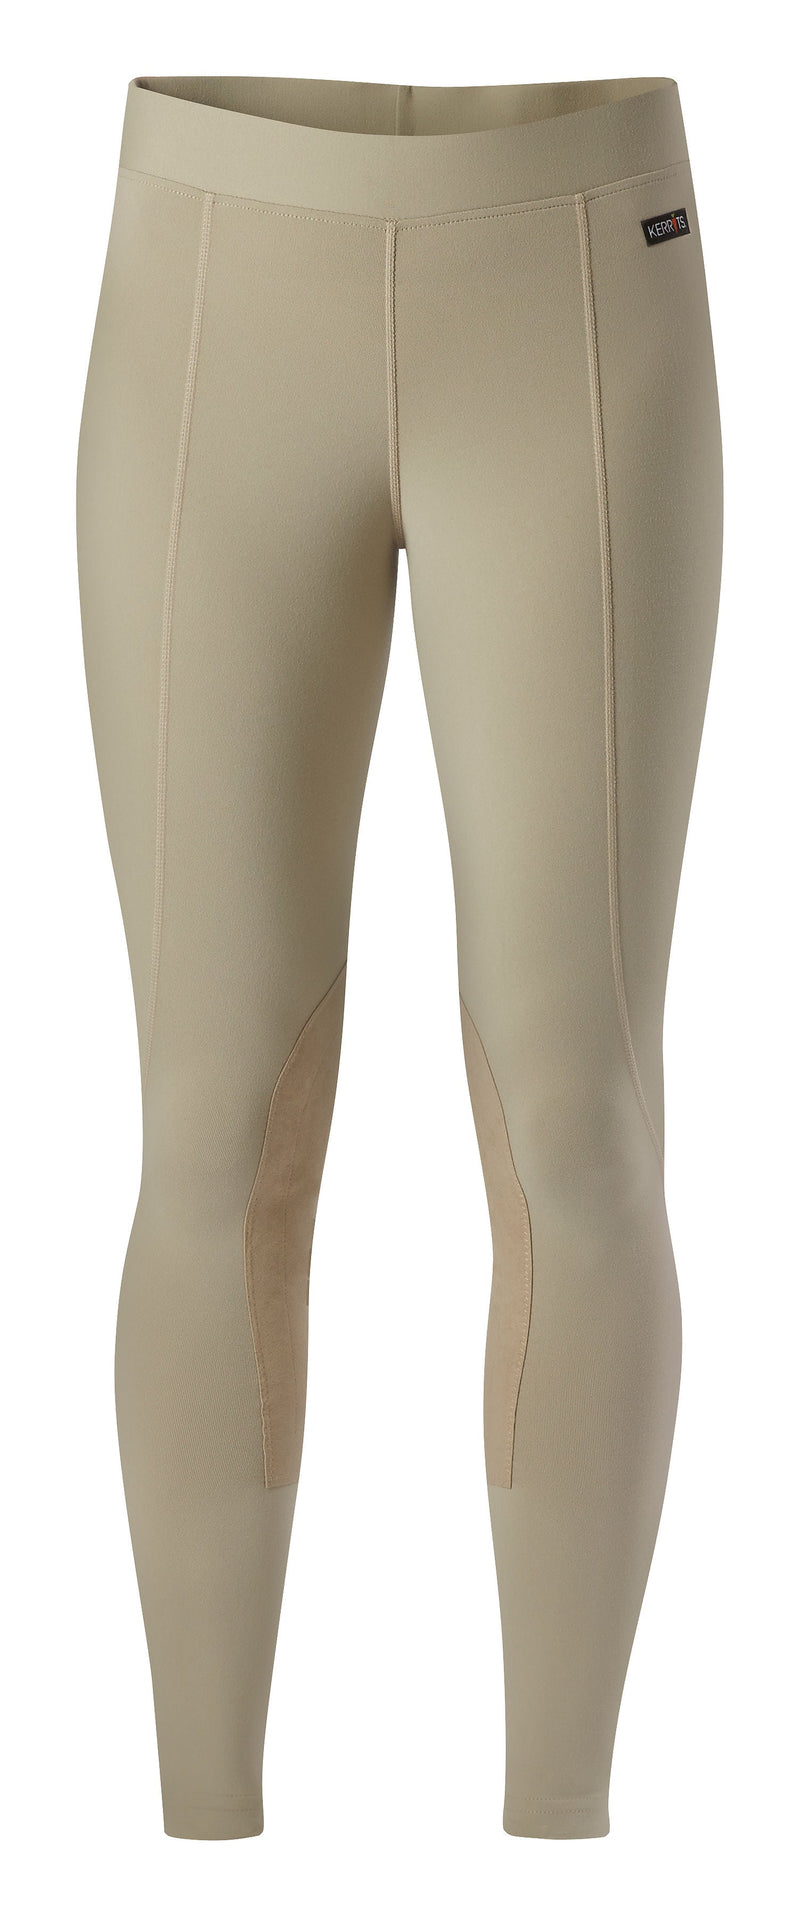 Tan Kerrits Flow Rise Women's Knee Patch Performance Tights